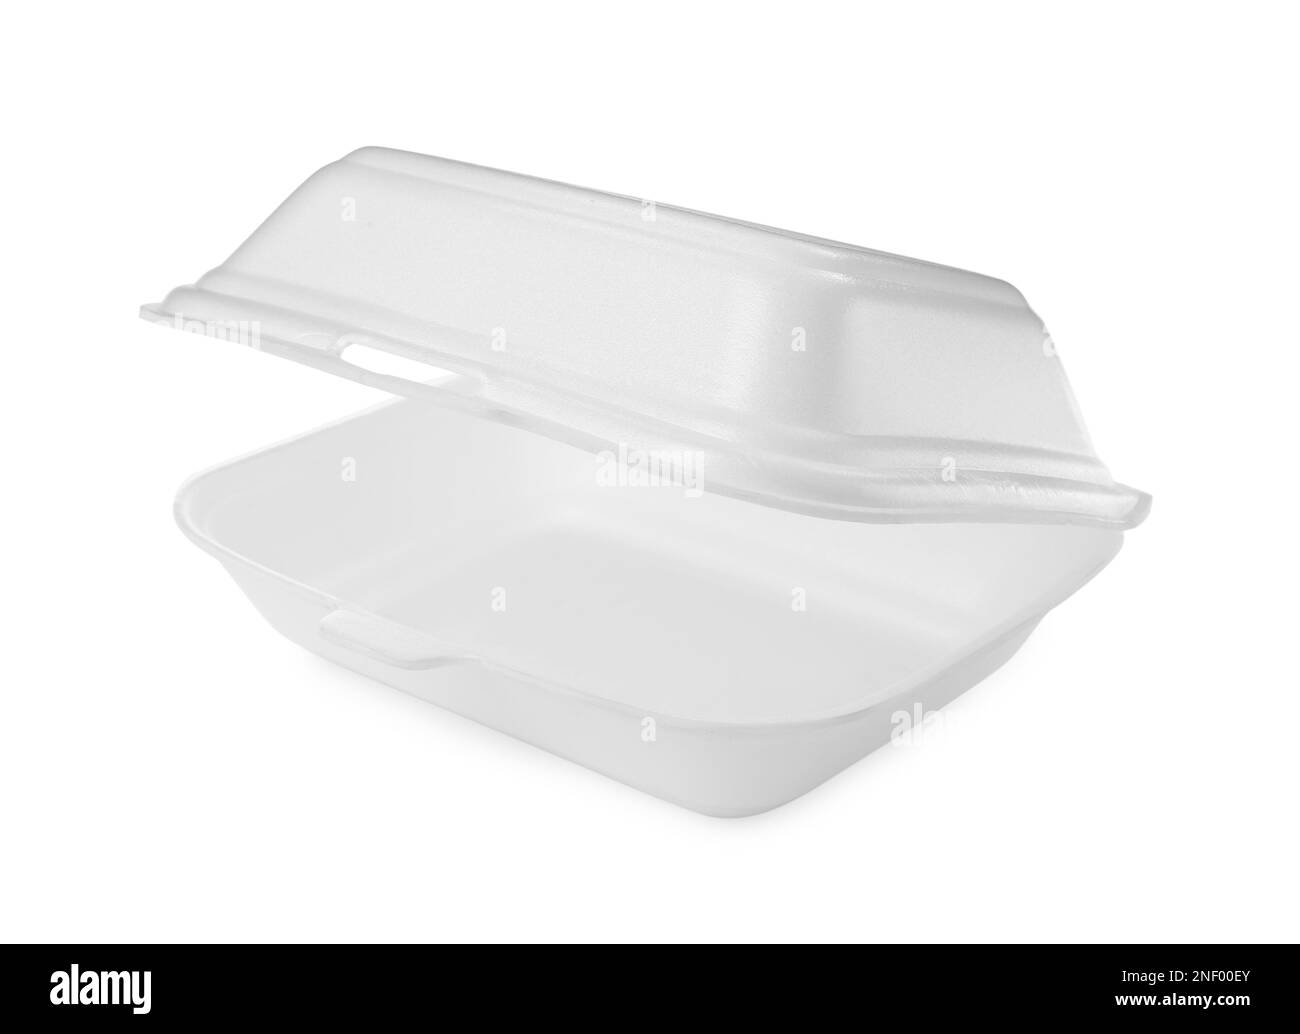 https://c8.alamy.com/comp/2NF00EY/disposable-plastic-lunch-box-isolated-on-white-2NF00EY.jpg